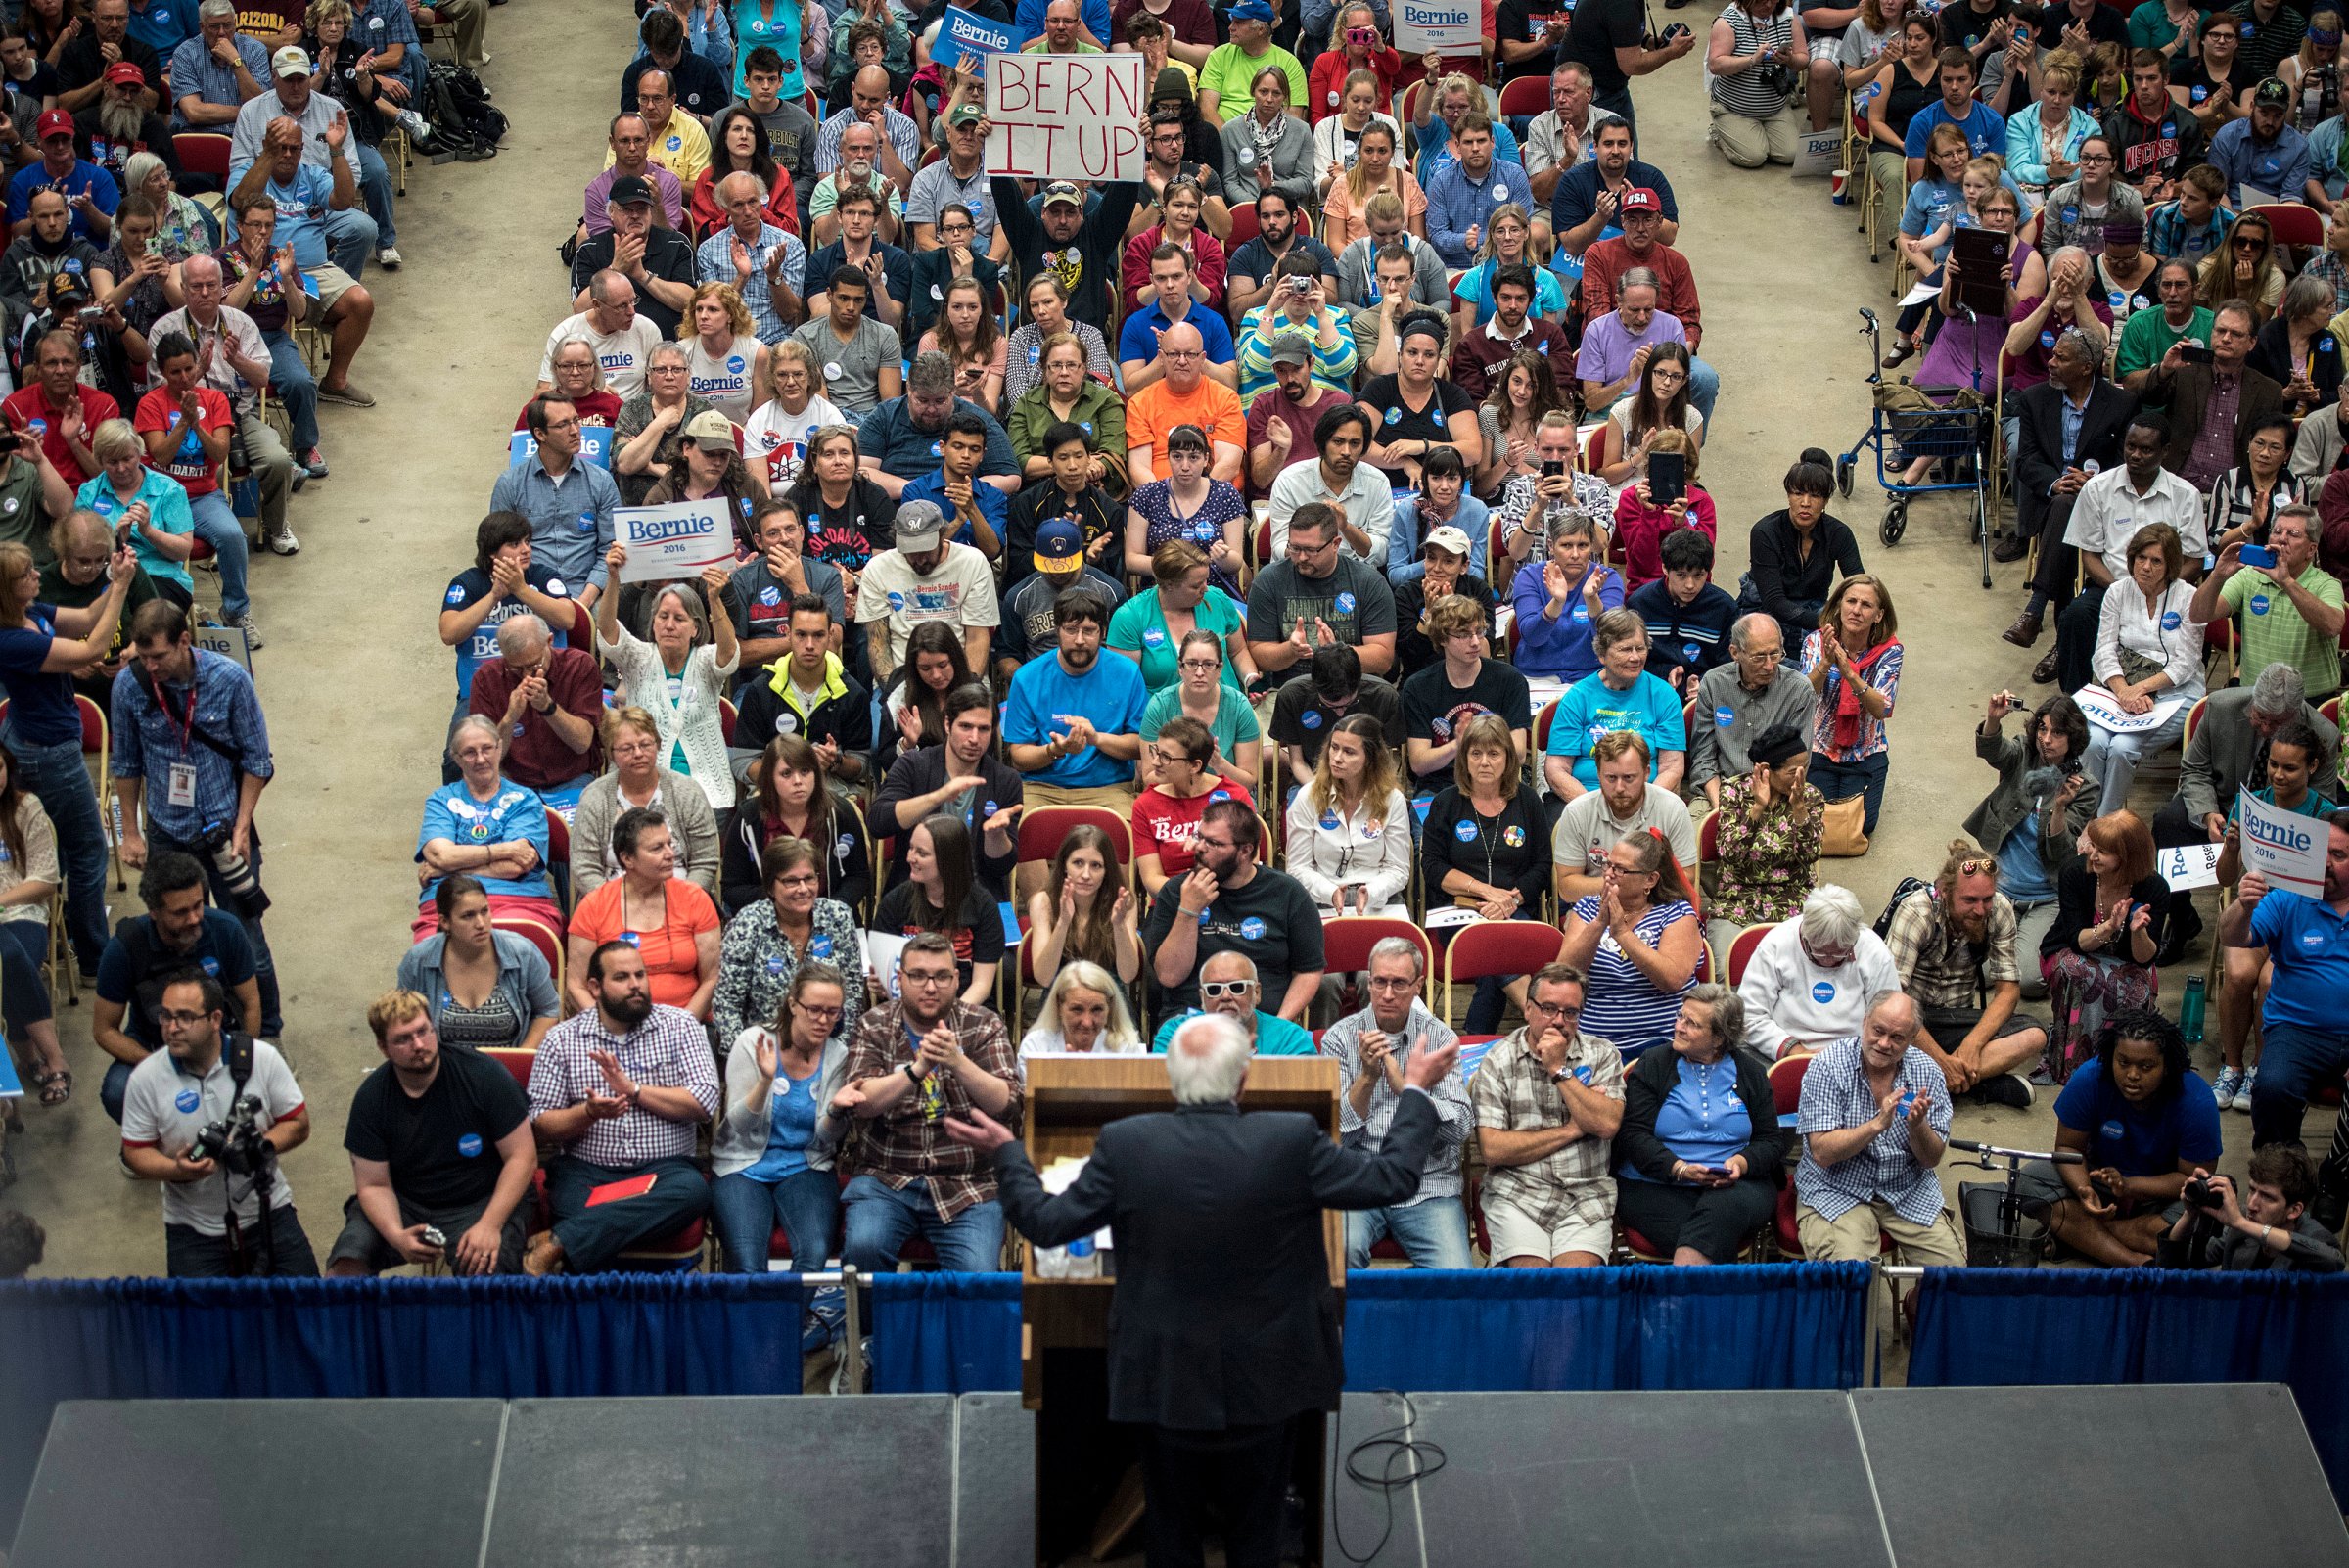 U.S. Senator Bernie Sanders, an Independent from Vermont and 2016 U.S. presidential candidate, speaks during a campaign rally in Madison, Wisconsin, U.S., on Wednesday, July 1, 2015. Sanders said he had attracted 200,000 donors as of mid-June and his campaign had raised $8.3 million online through June 17, according to FEC filings by ActBlue, the fundraising platform that he and some other left-leaning candidates and causes use. Photographer: Christopher Dilts/Bloomberg *** Local Caption *** Bernie Sanders